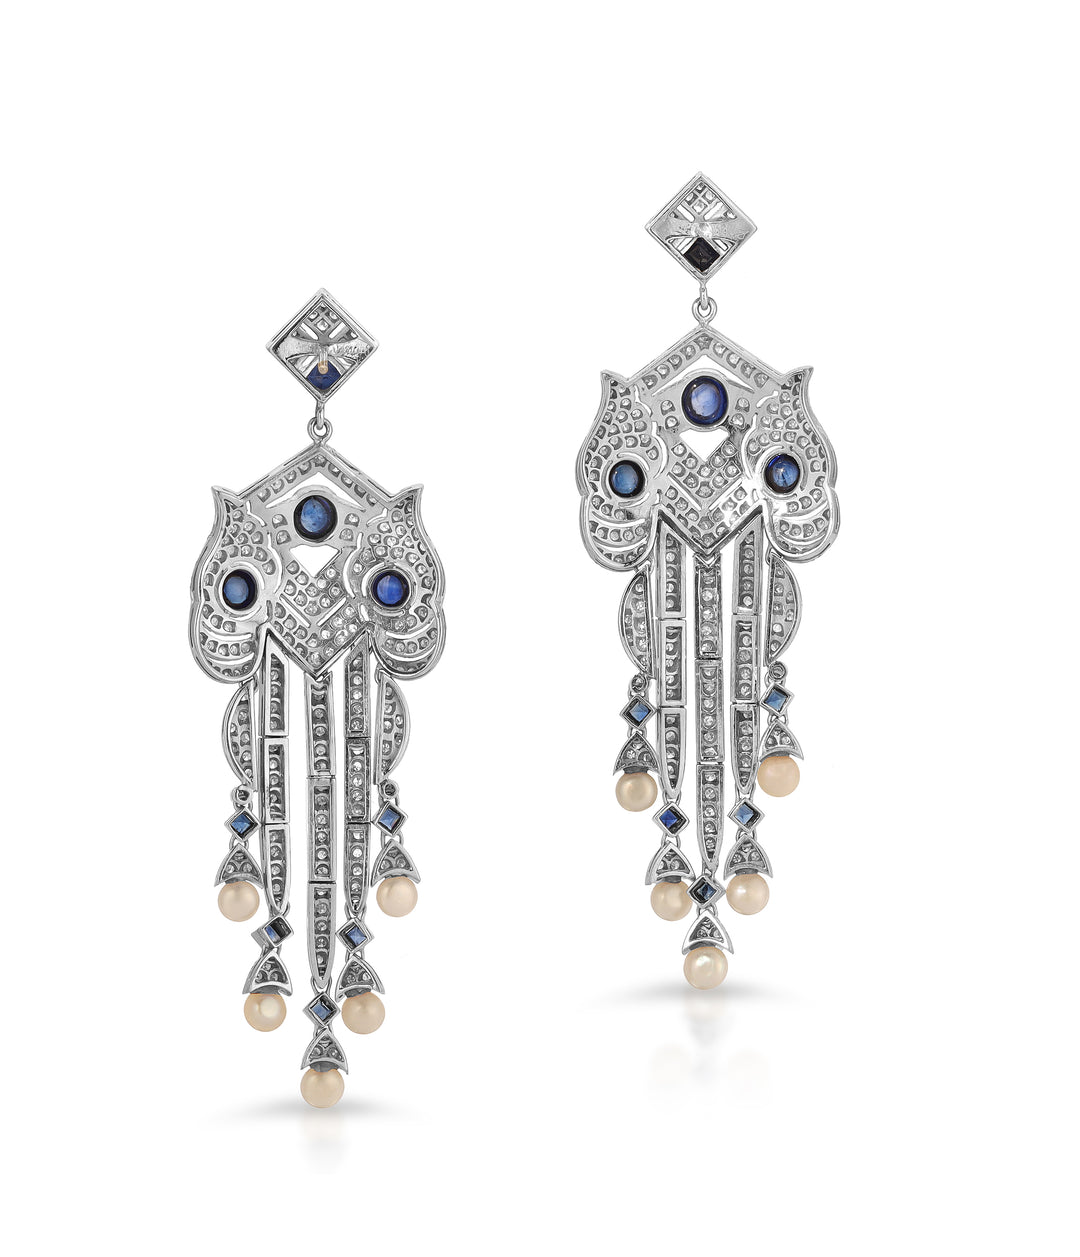 Diamond, Sapphire and Pearl Earrings in Platinum